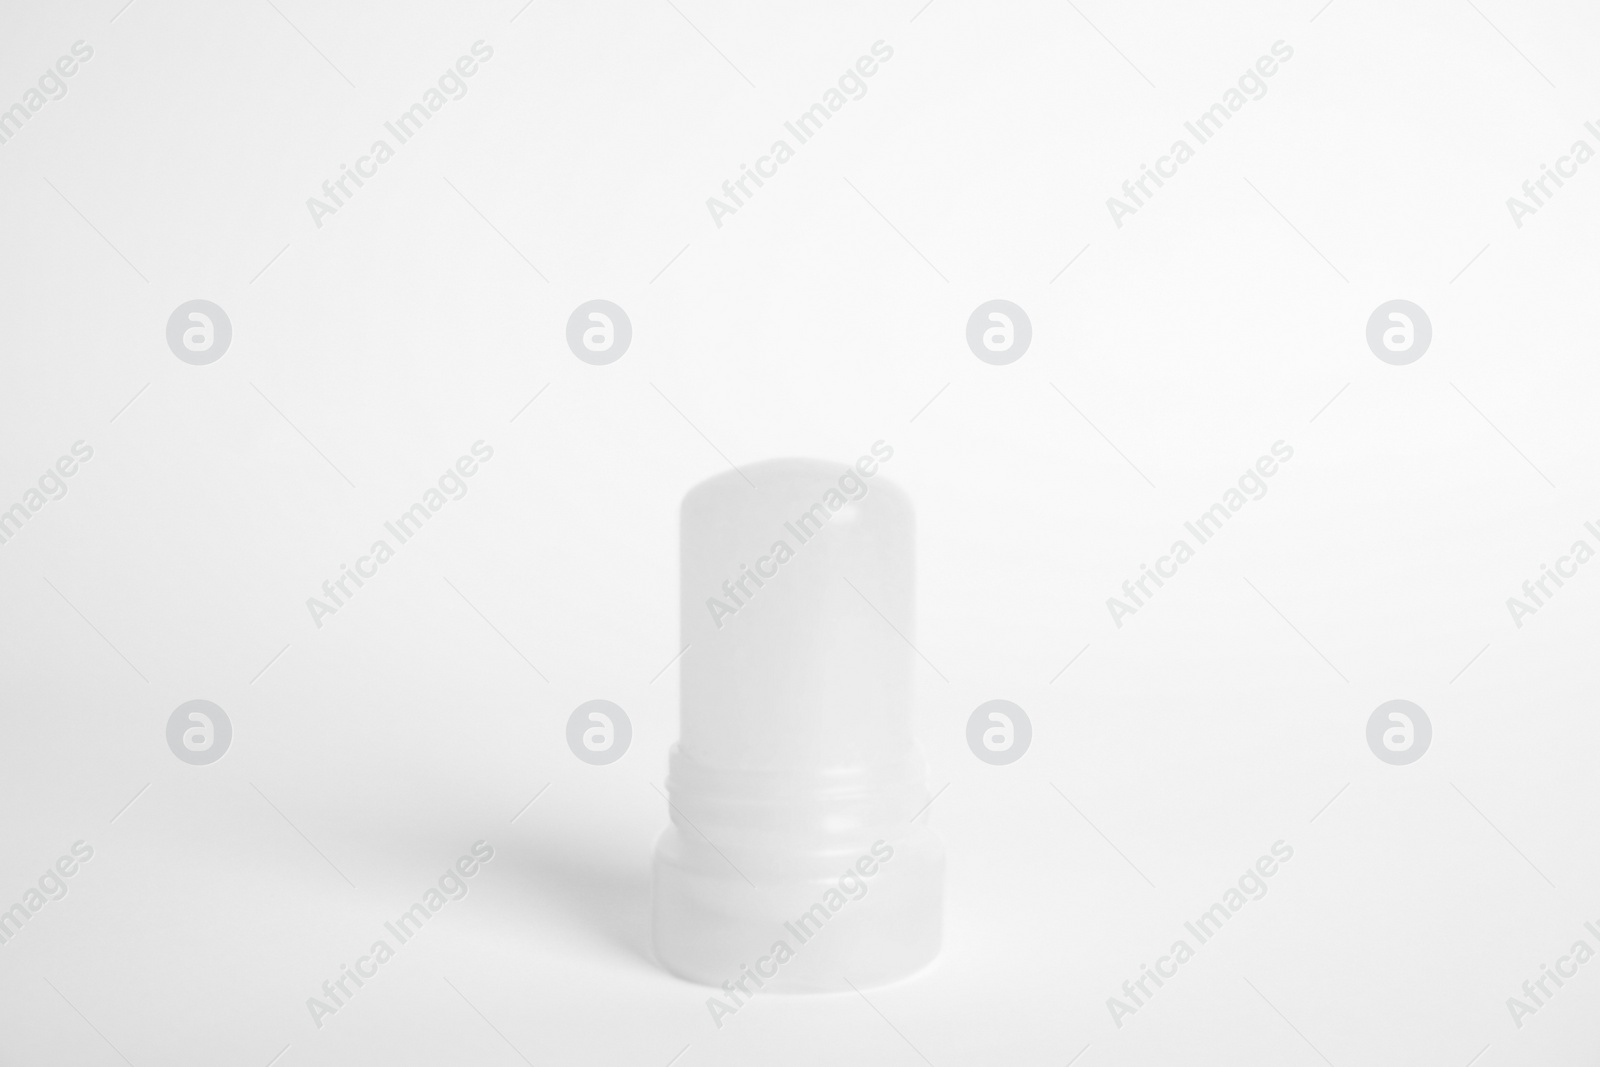 Photo of Natural crystal alum stick deodorant on white background